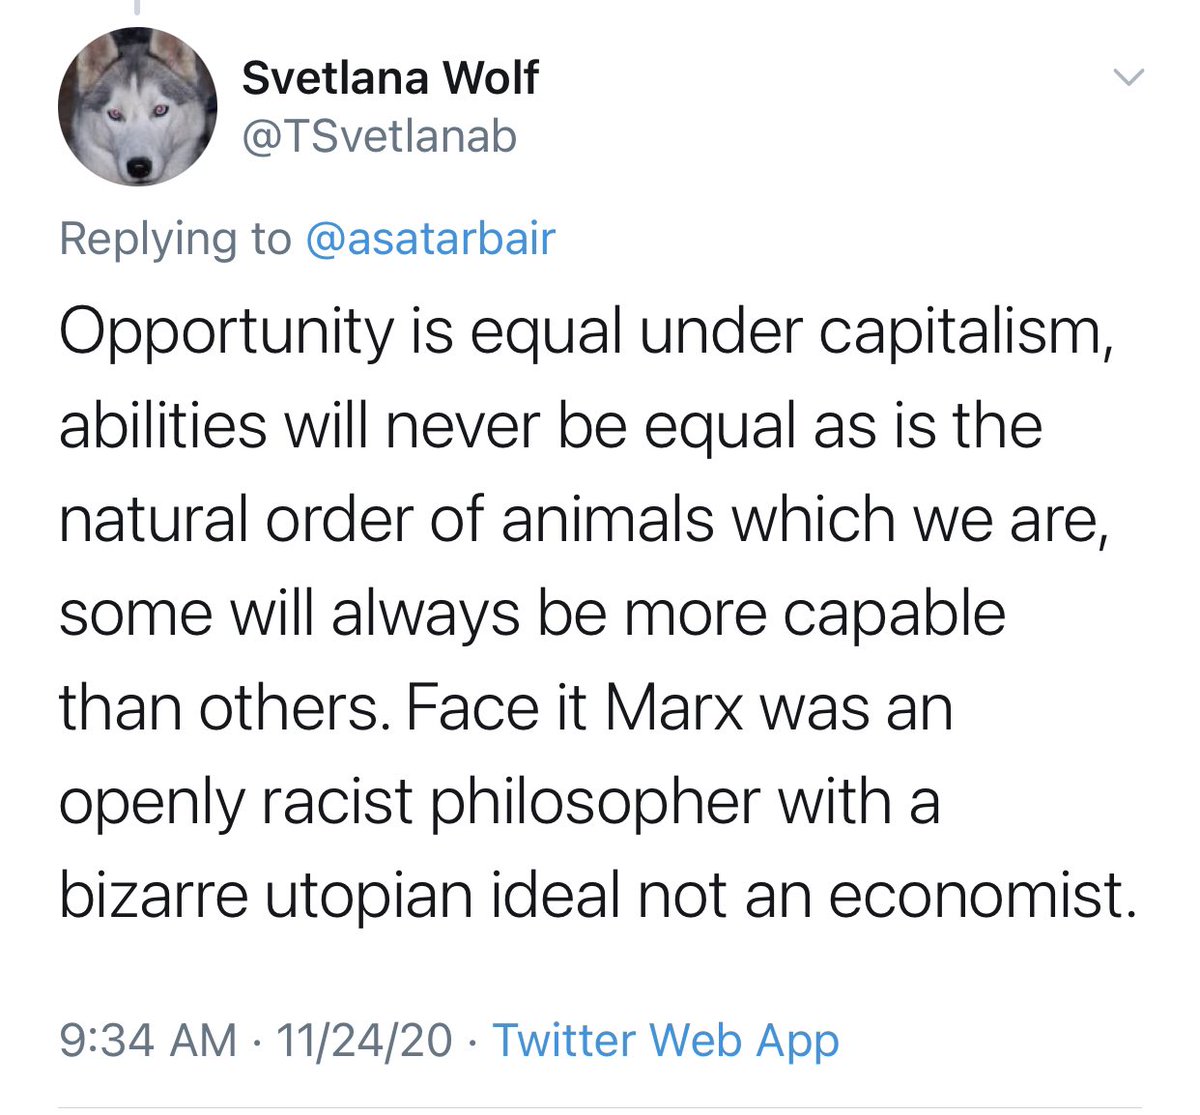 Ah, the old tautology: some people are ‘more capable’ —> they get rich —> the existence of the rich proves they are more capable  And I’m supposed to take this seriously